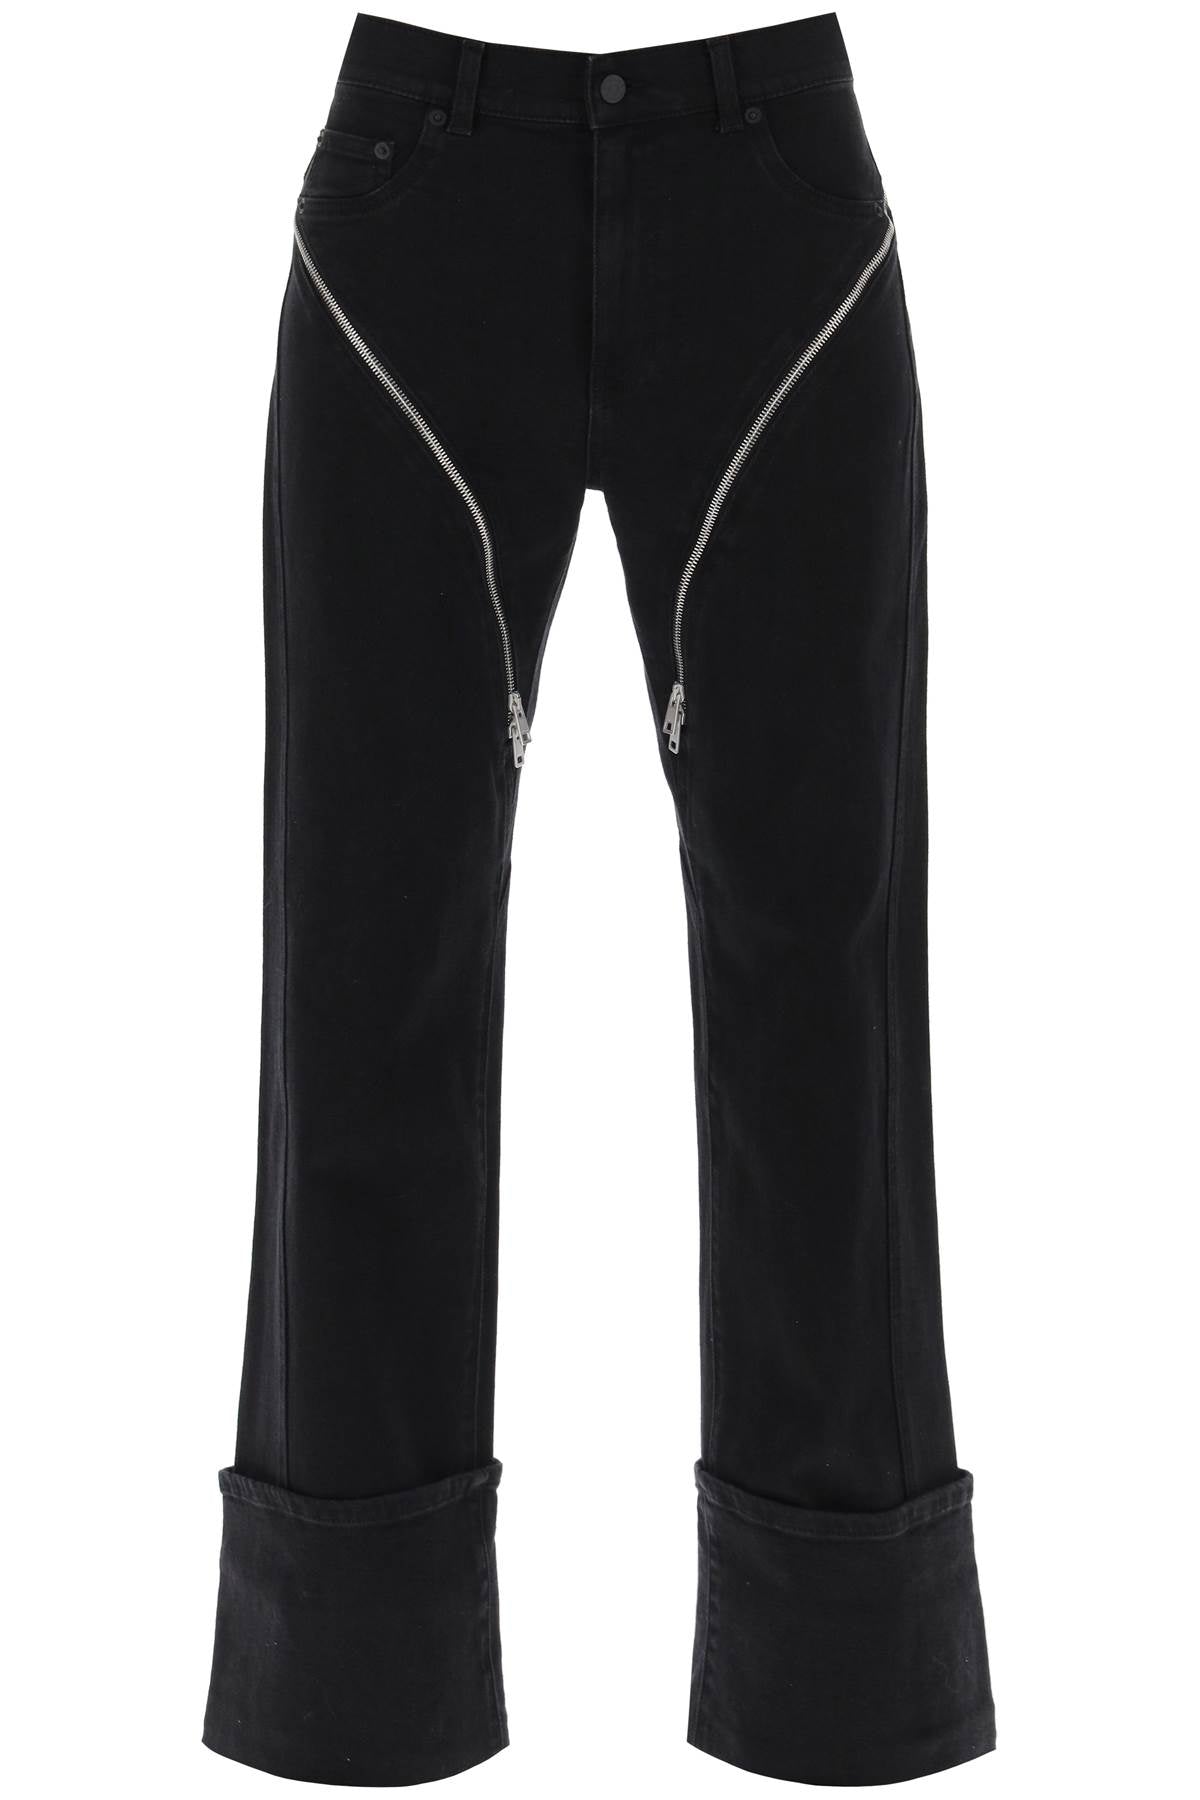 Mugler straight jeans with zippers-0